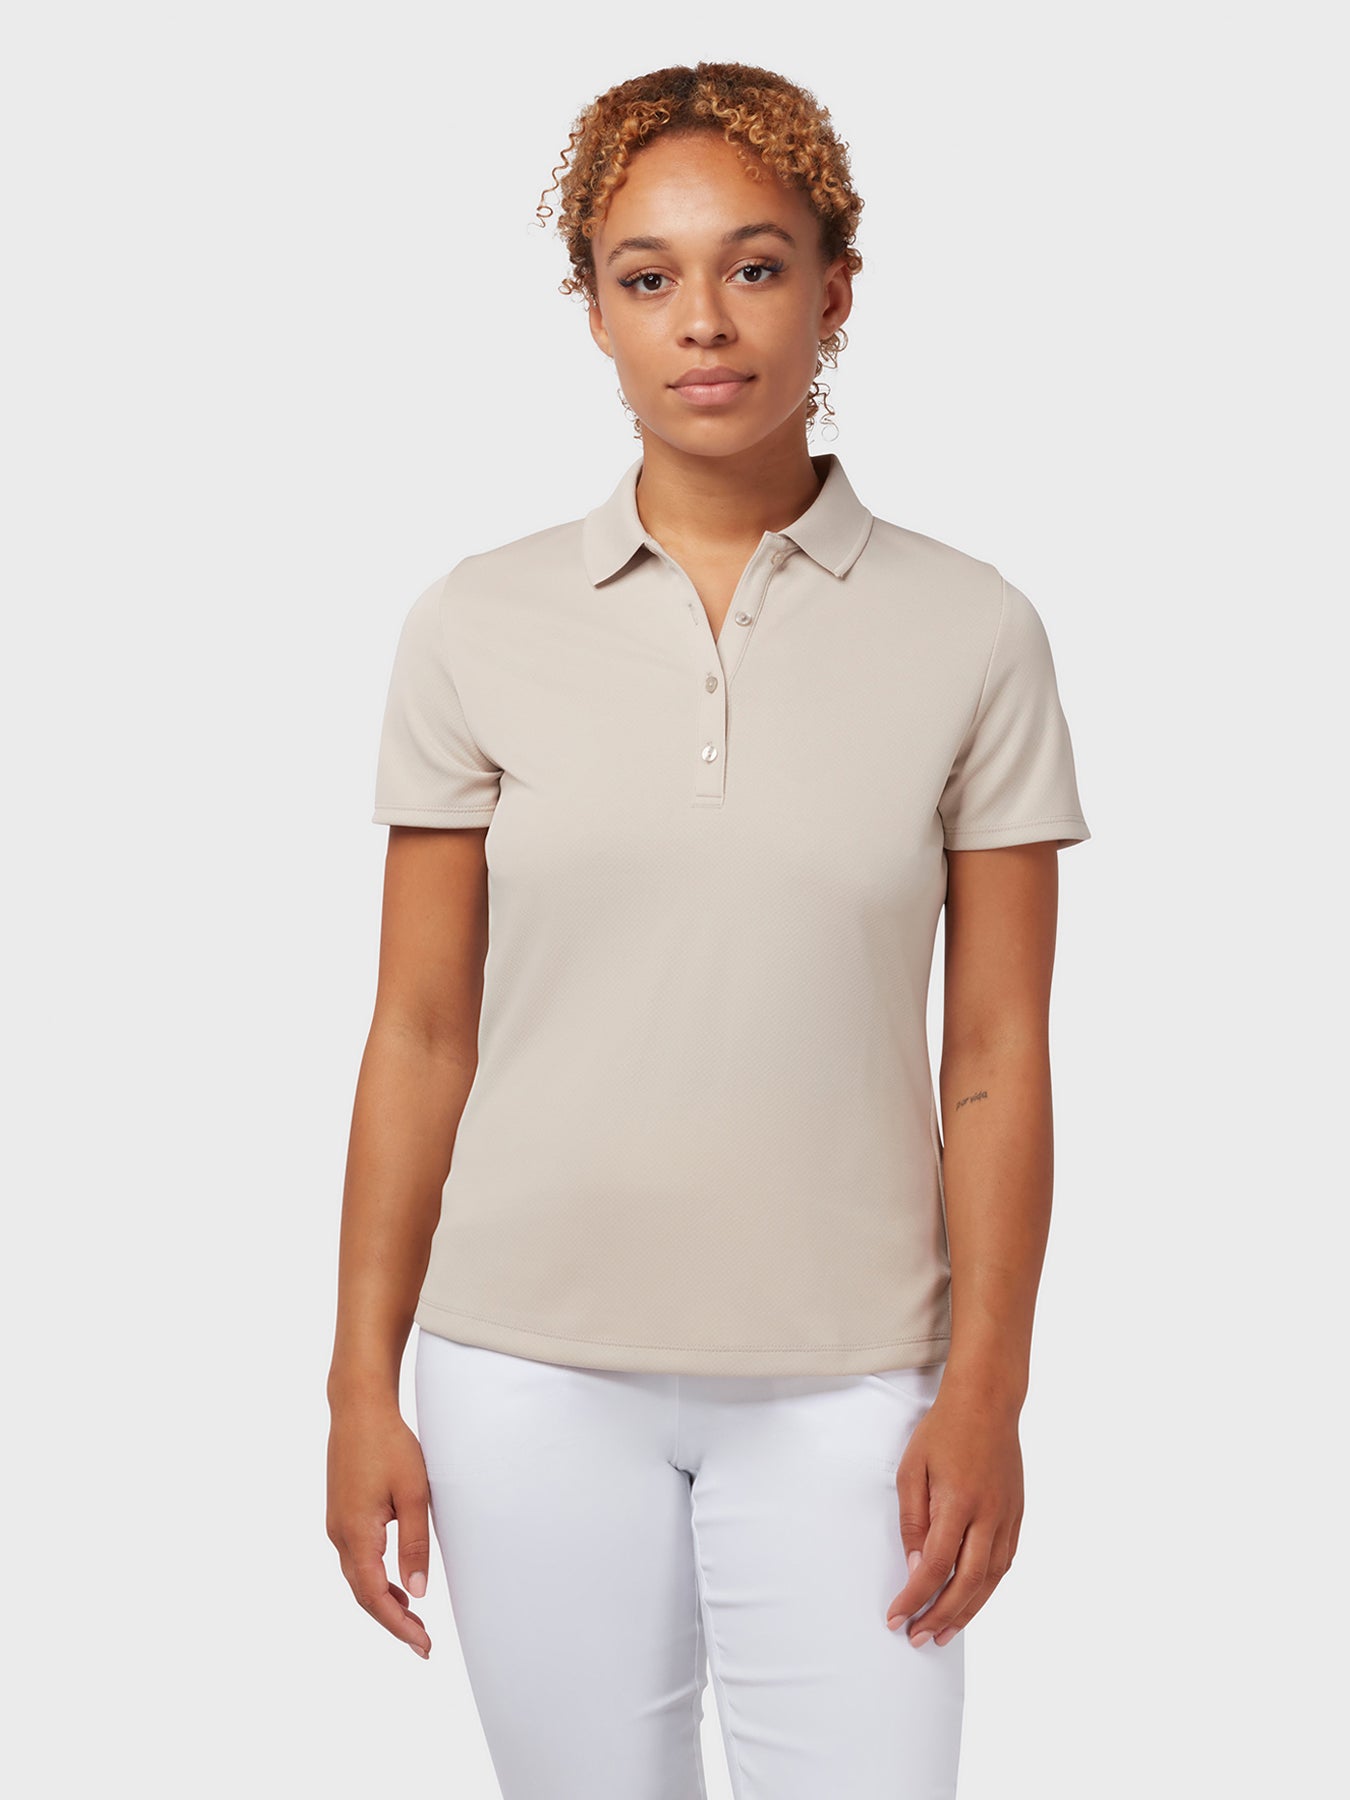 View Swing Tech Womens Polo In Chateau Grey information